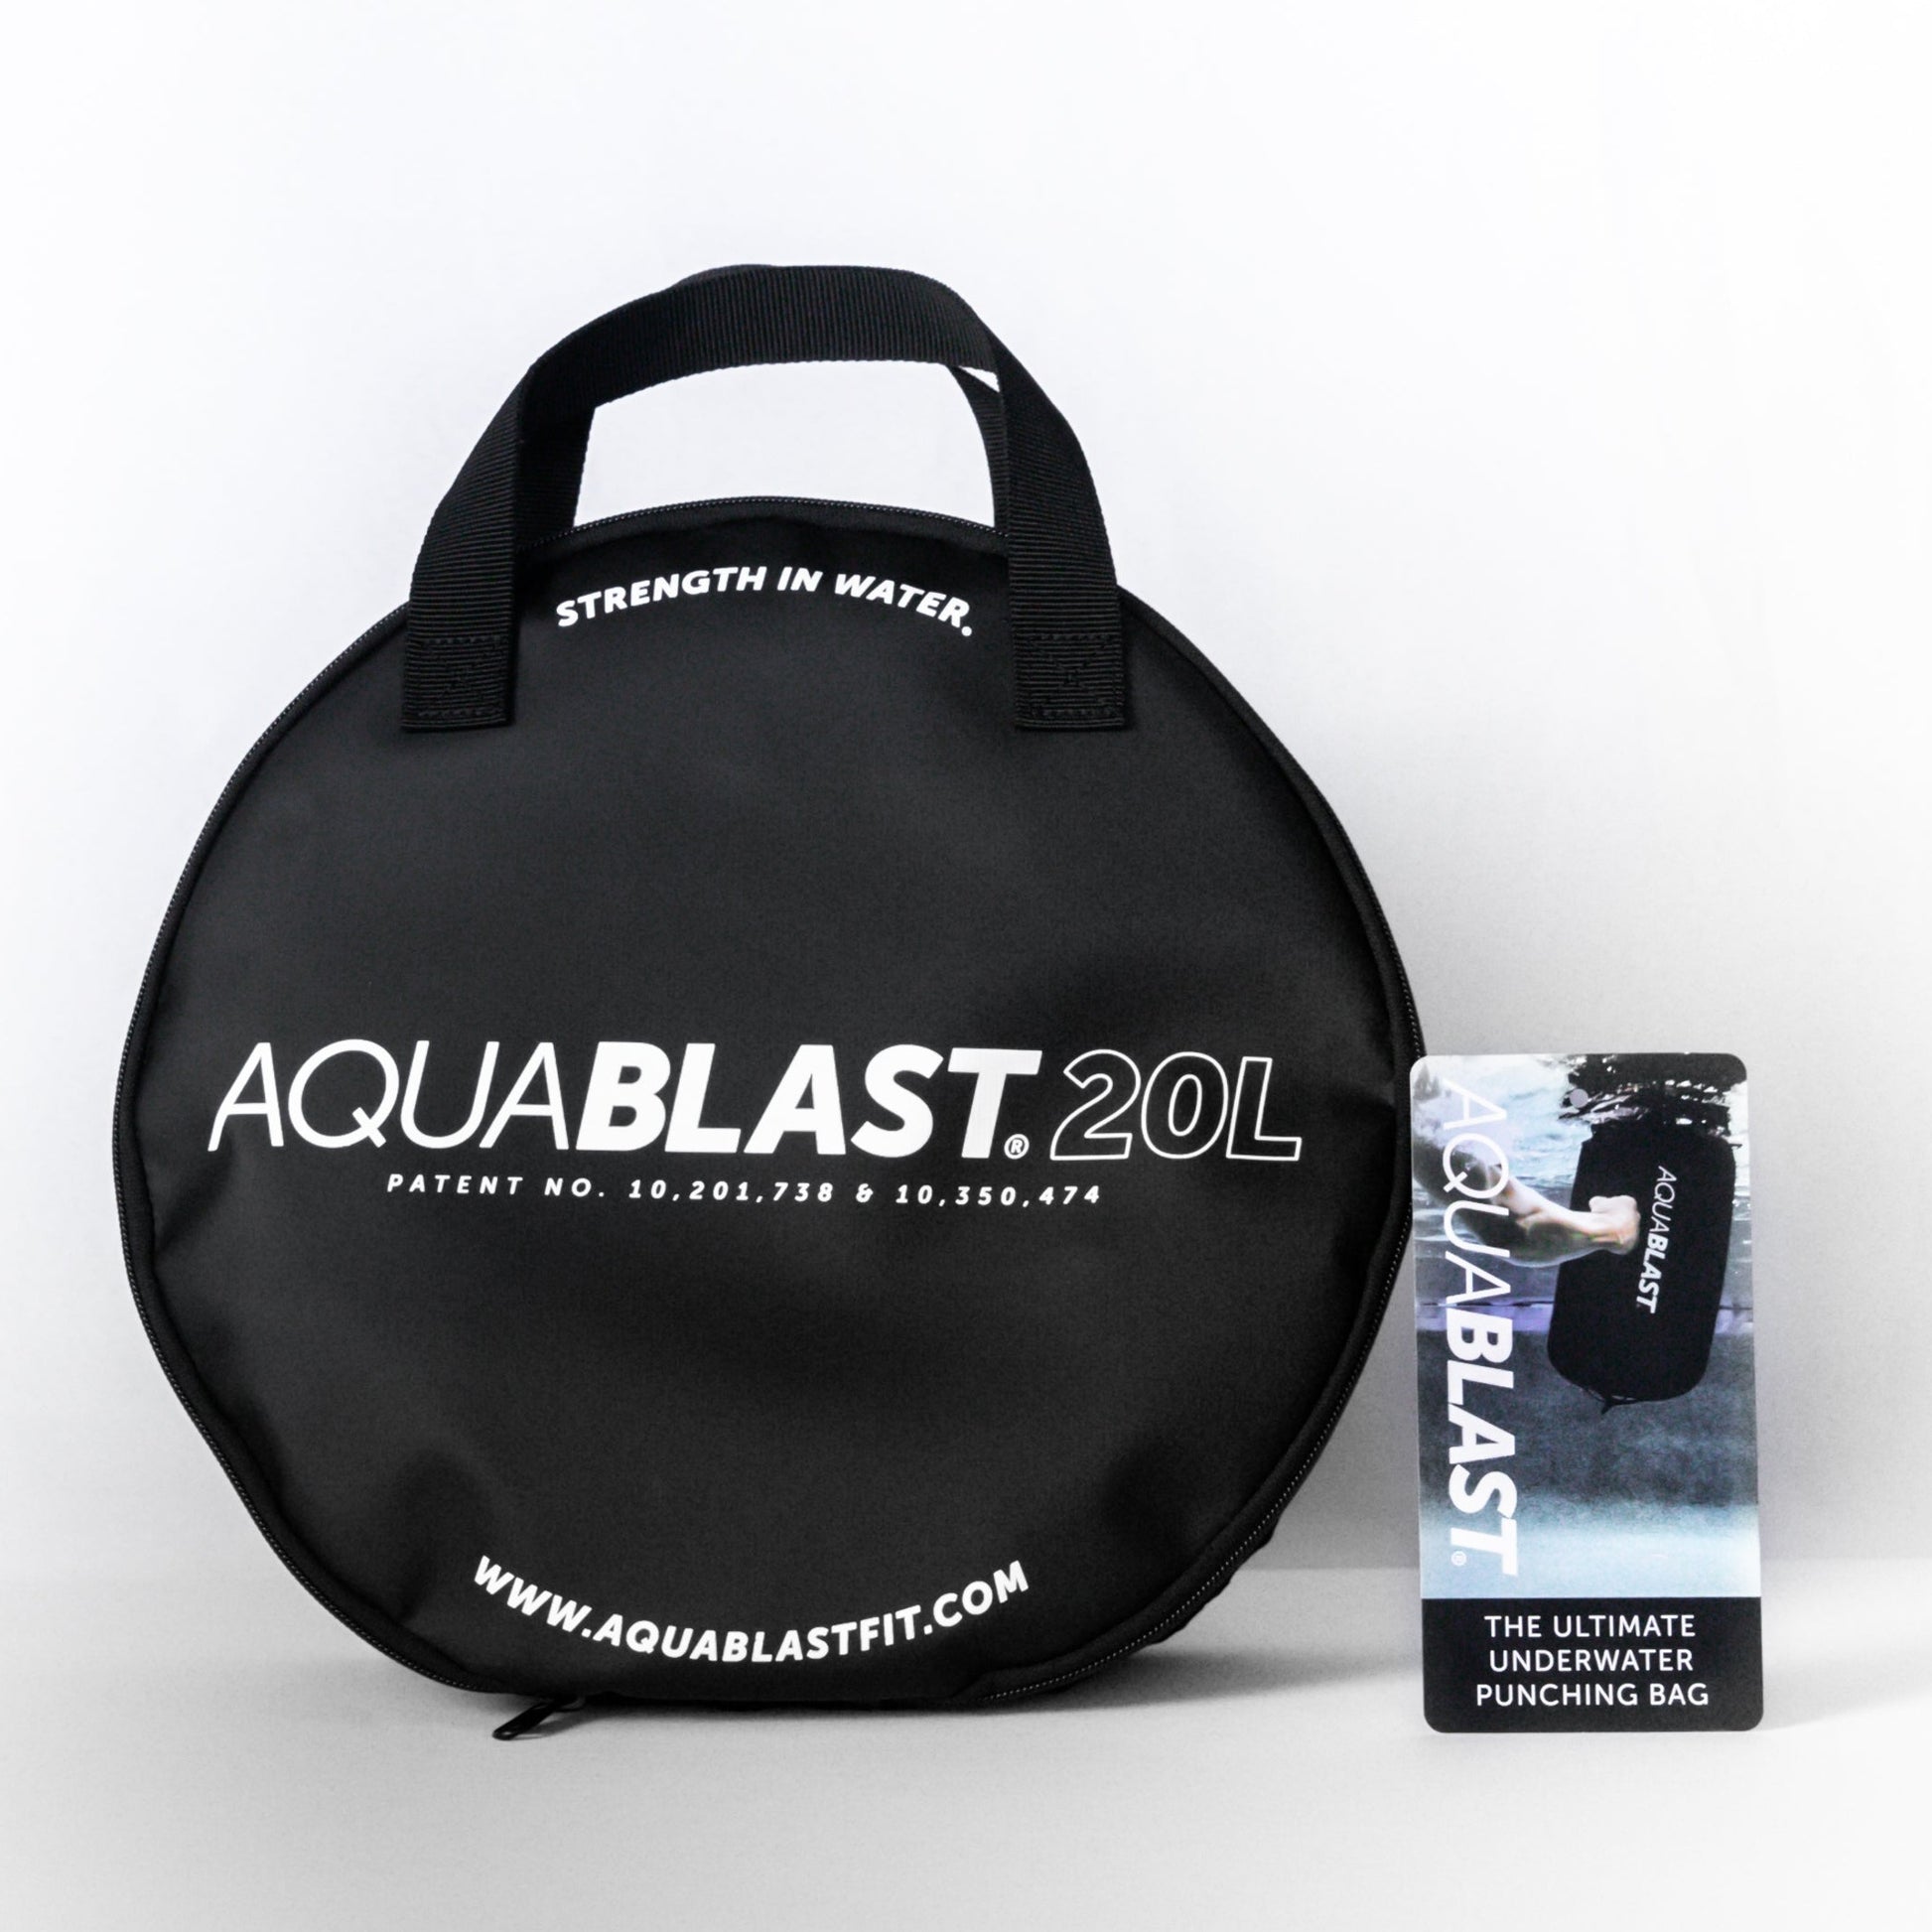 AquaBLAST 20 Liter Pool Fitness and punching bag. the only portable punching bag that fits in a bag and sets up in seconds